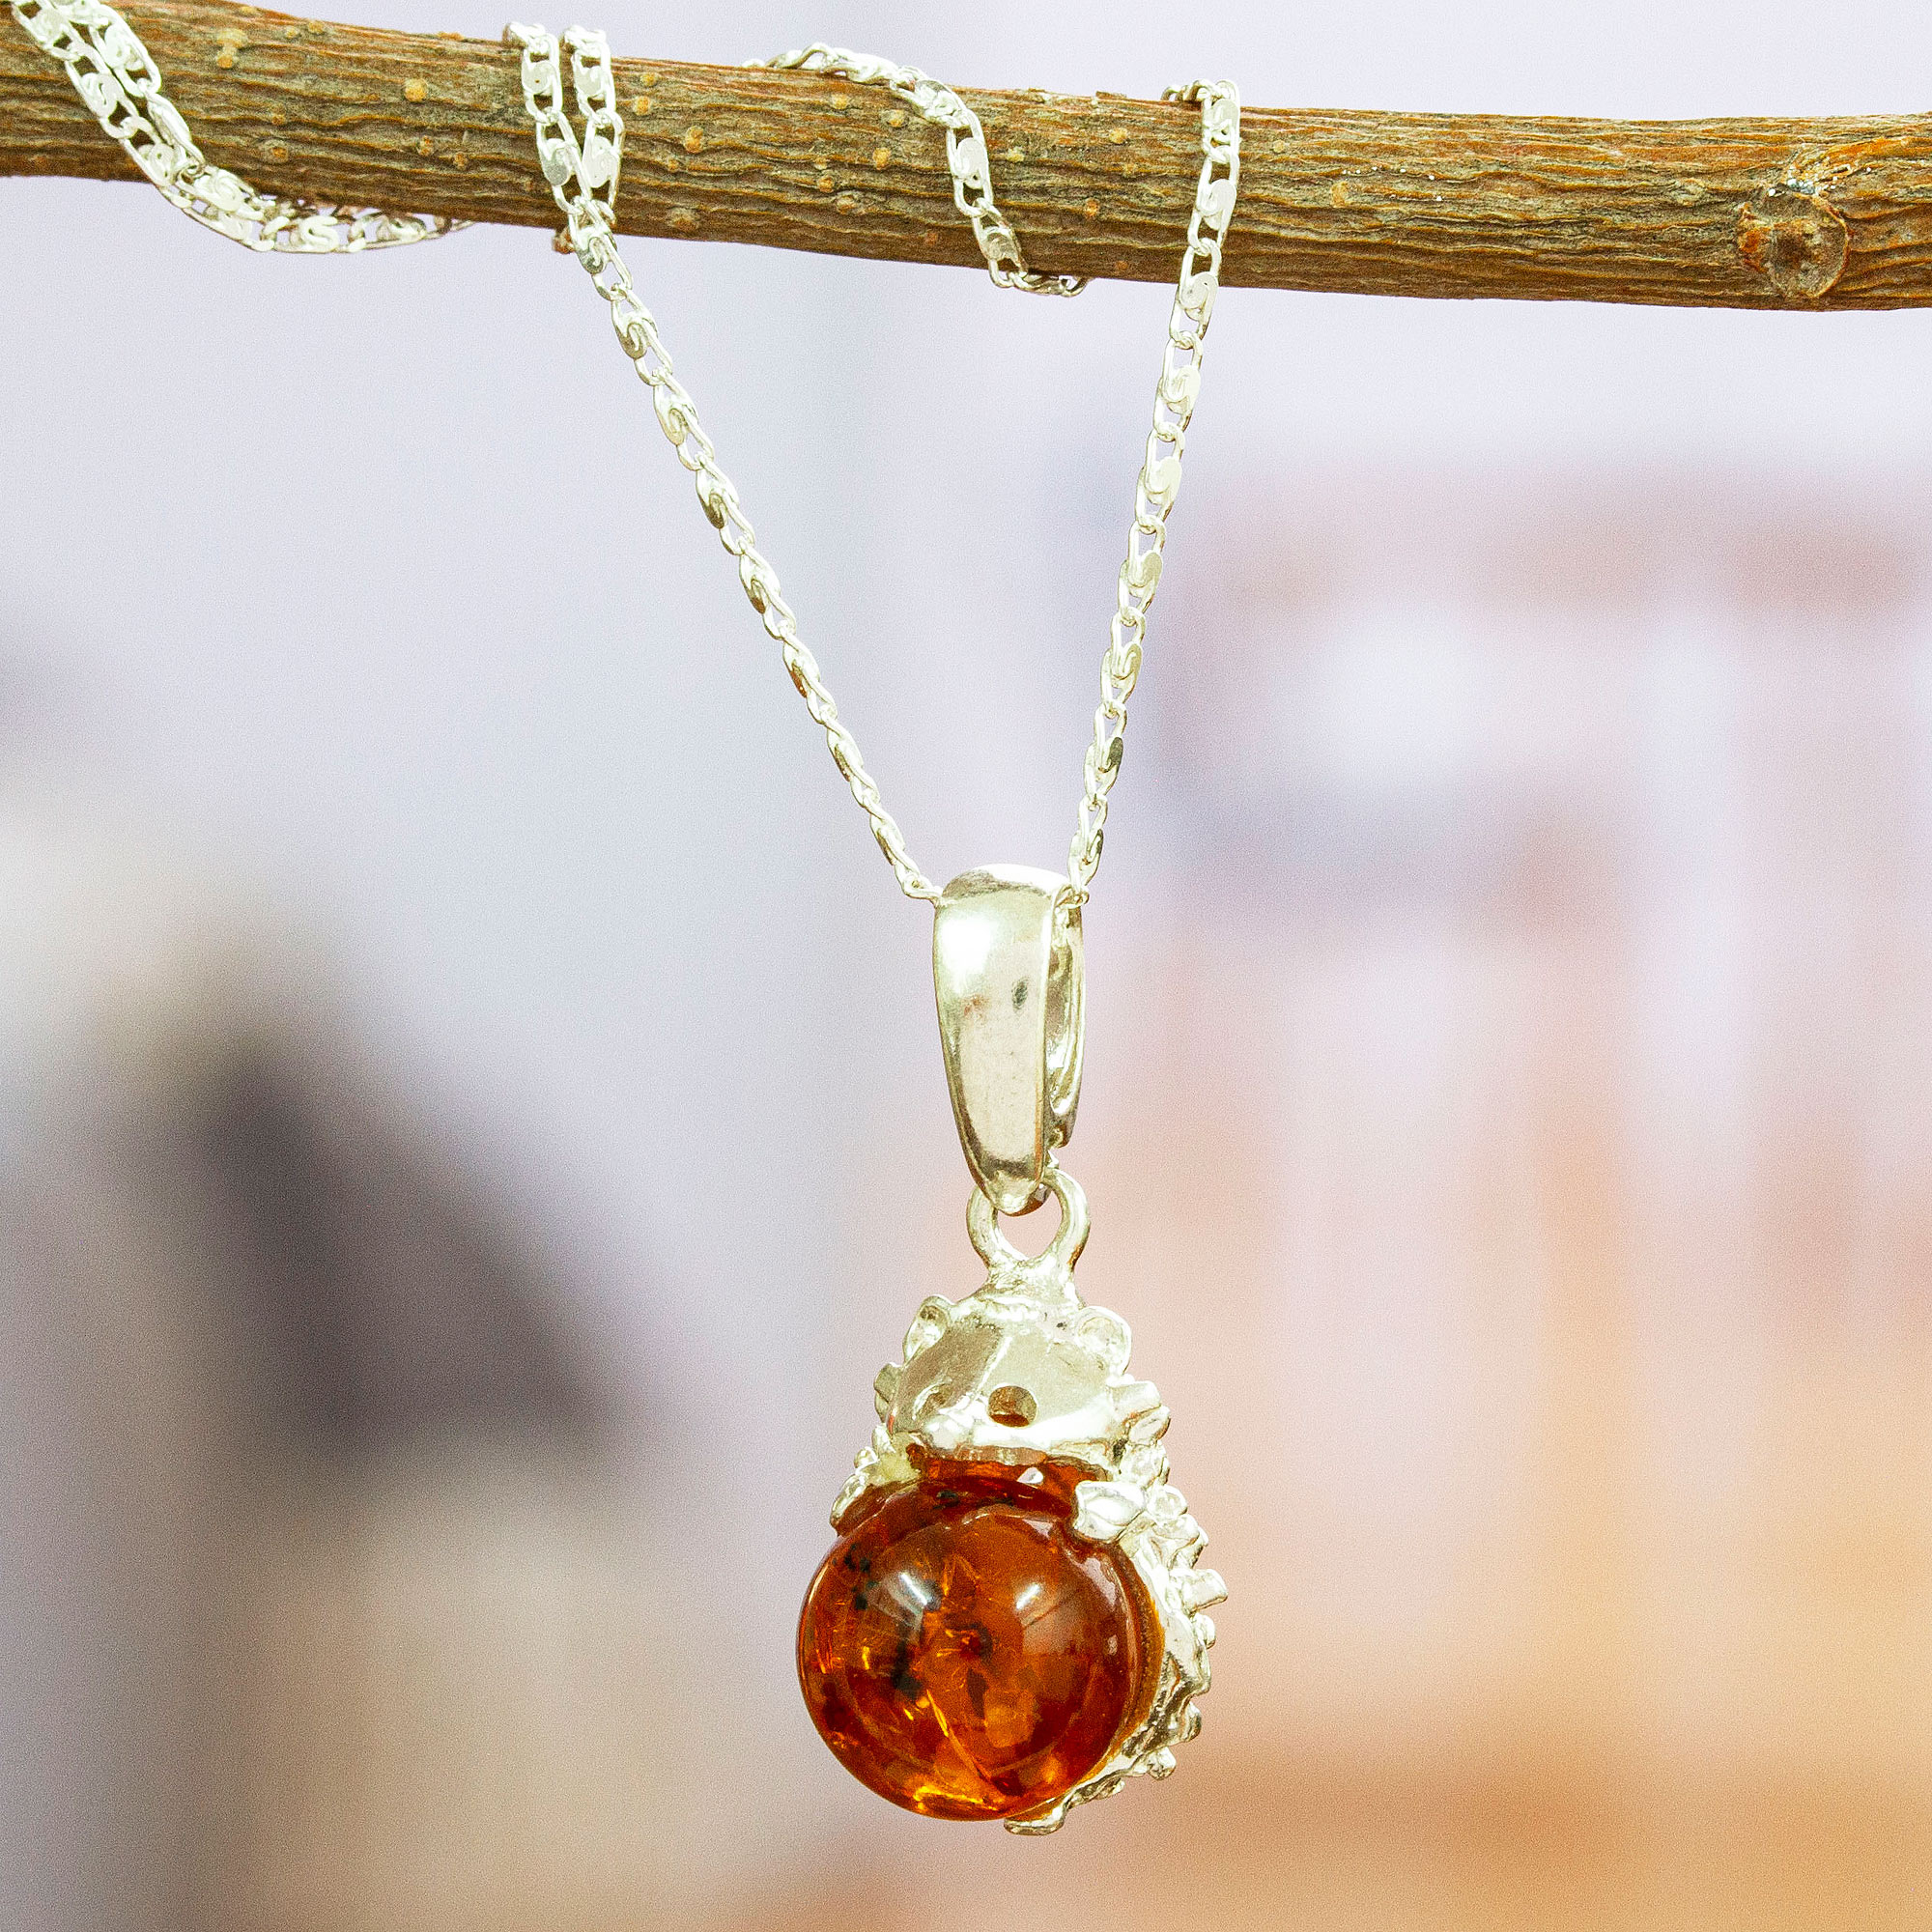 Buy Exotic India Amber Large Pendant - Sterling Silver at Amazon.in